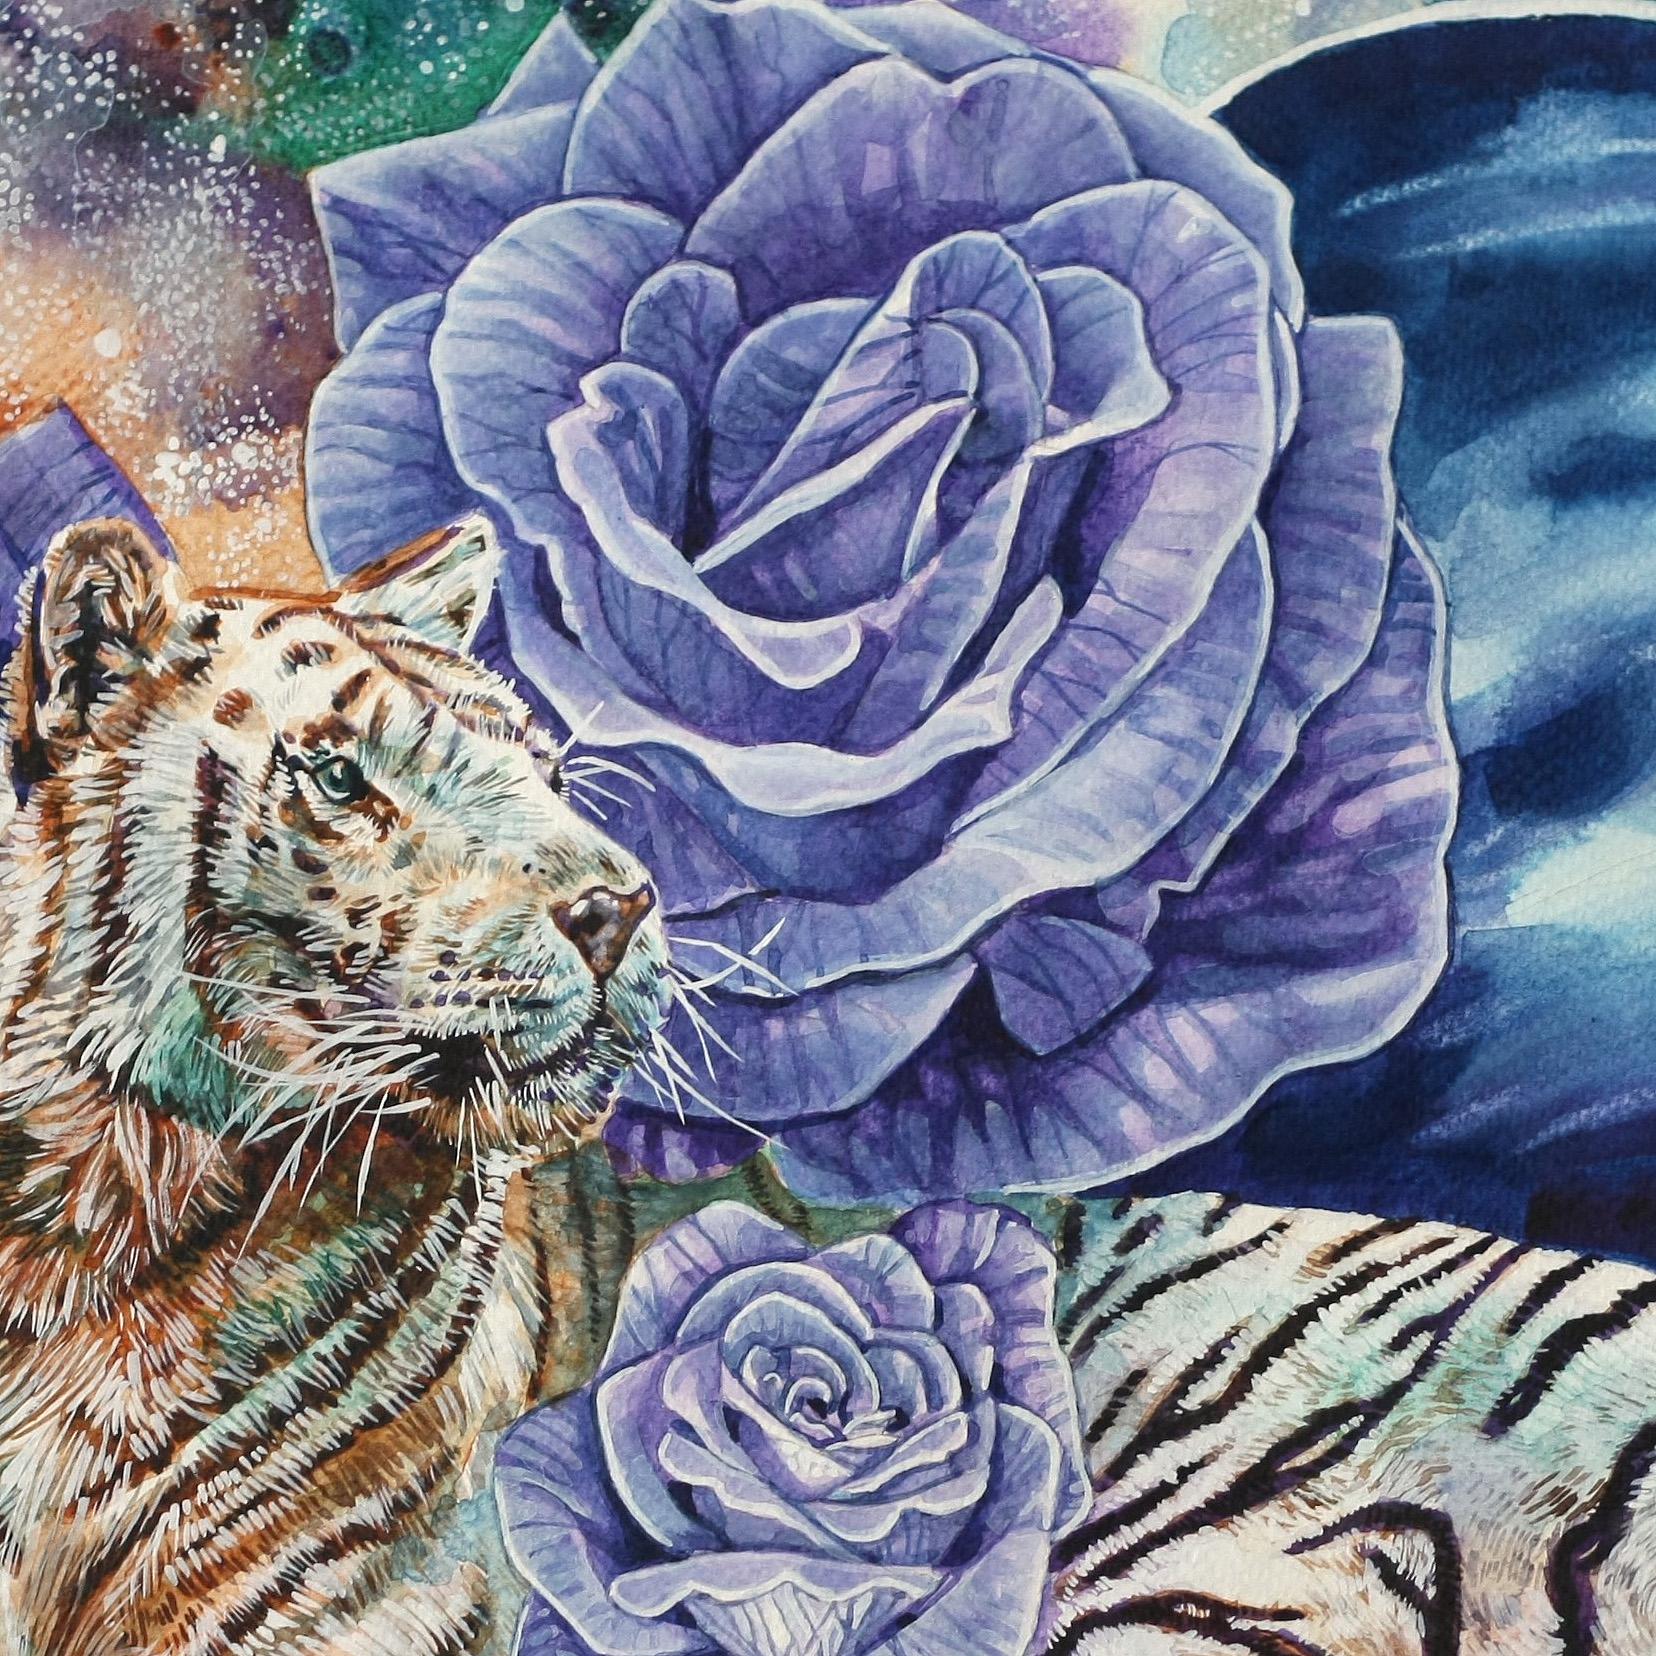 A one of a kind 30.7x24.7 Surreal Watercolor Painting executed by artist Kelsey Worth. A certificate of authenticity will be provided upon its purchase or delivery. 

Kelsey Worth, a San Diego-based watercolor and mixed media painter, combines her